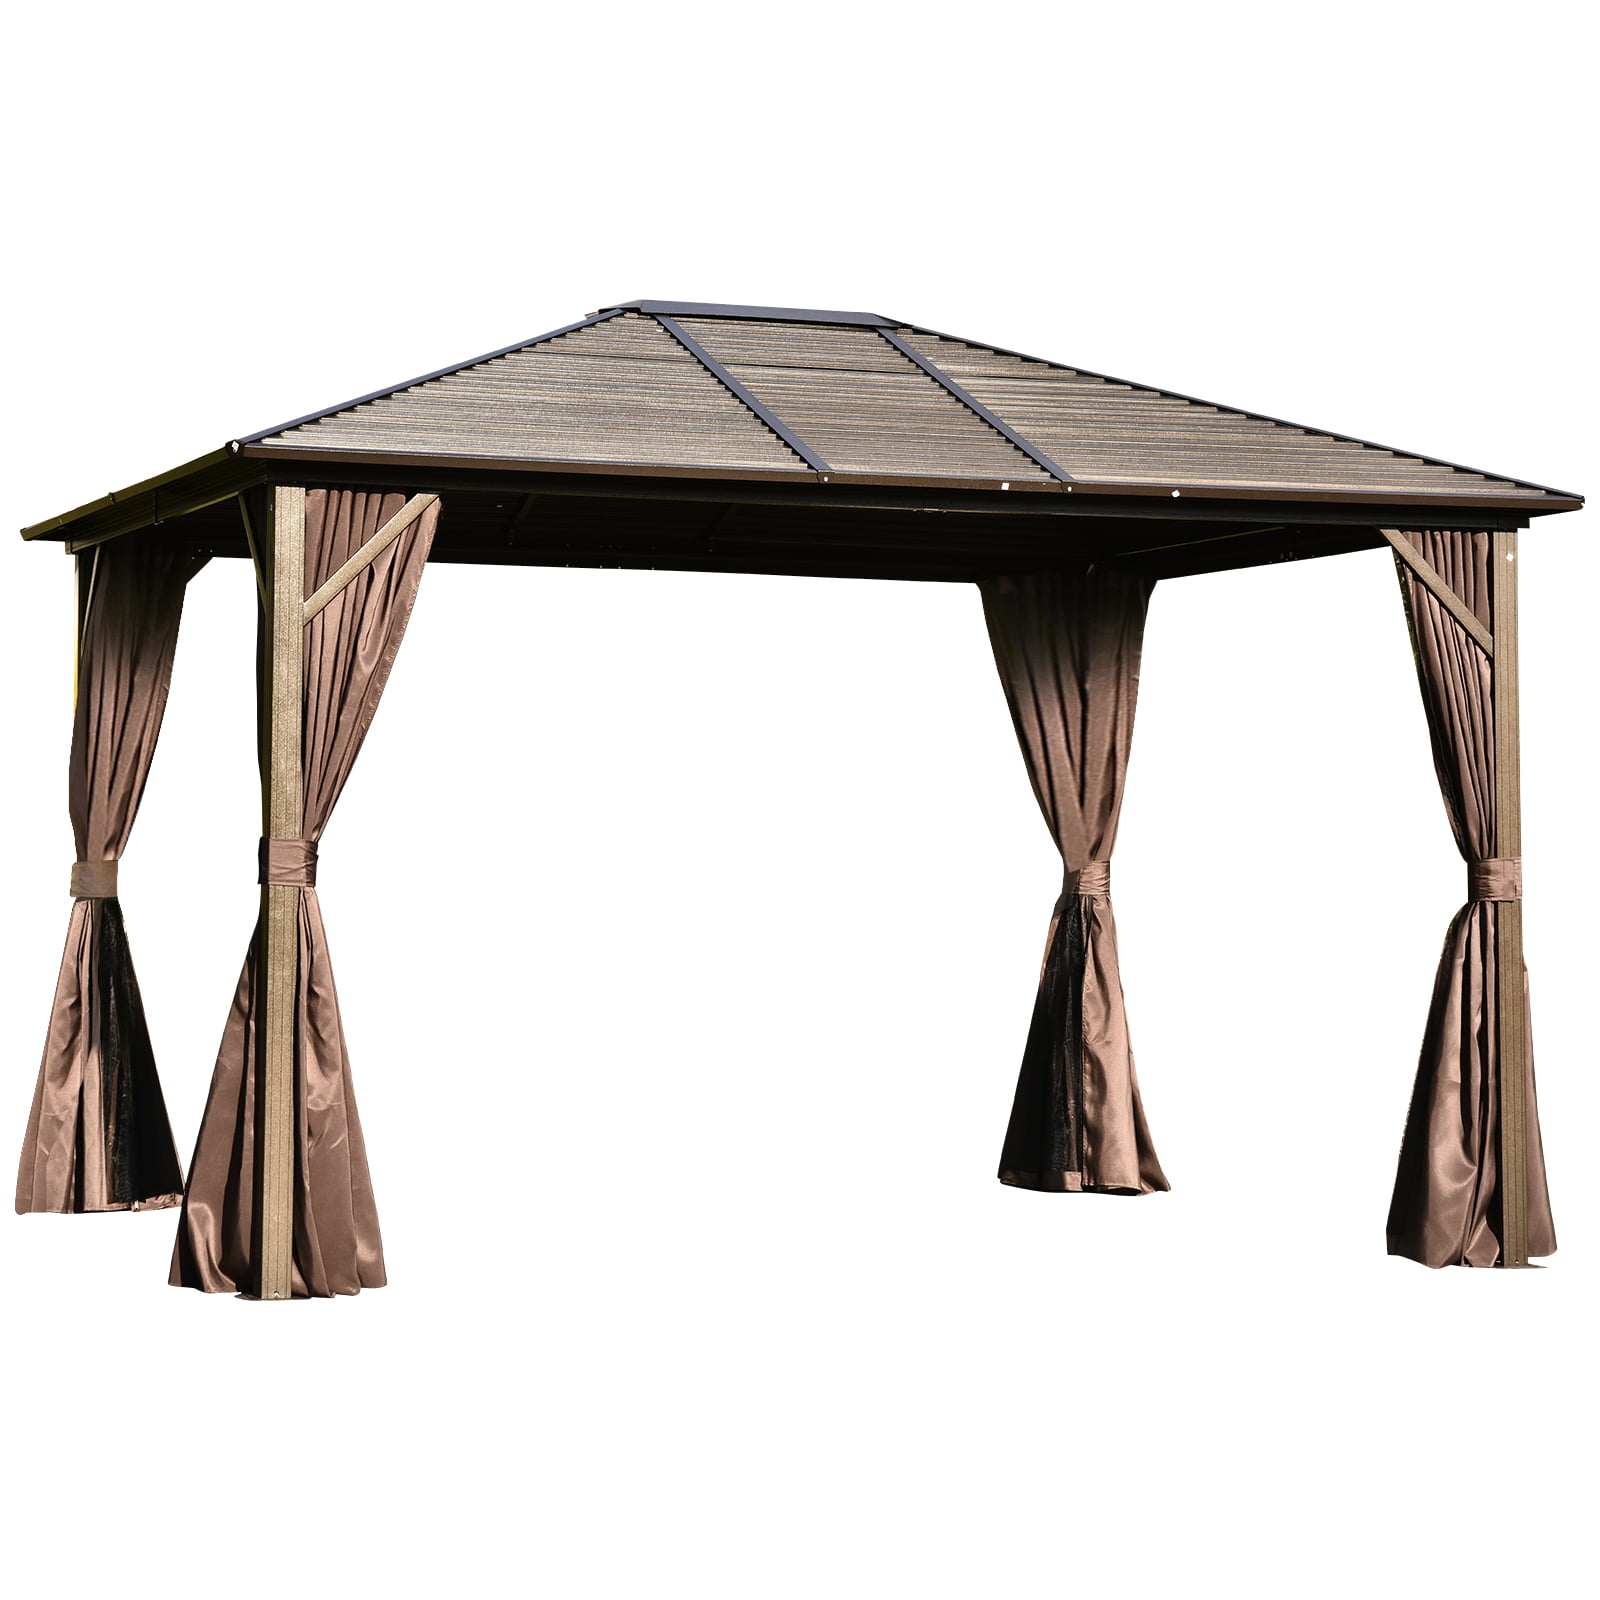 Outsunny 10&rsquo; x 12&rsquo; Steel Hardtop Gazebo with Netting Curtains and Sidewalls, Brown and Black